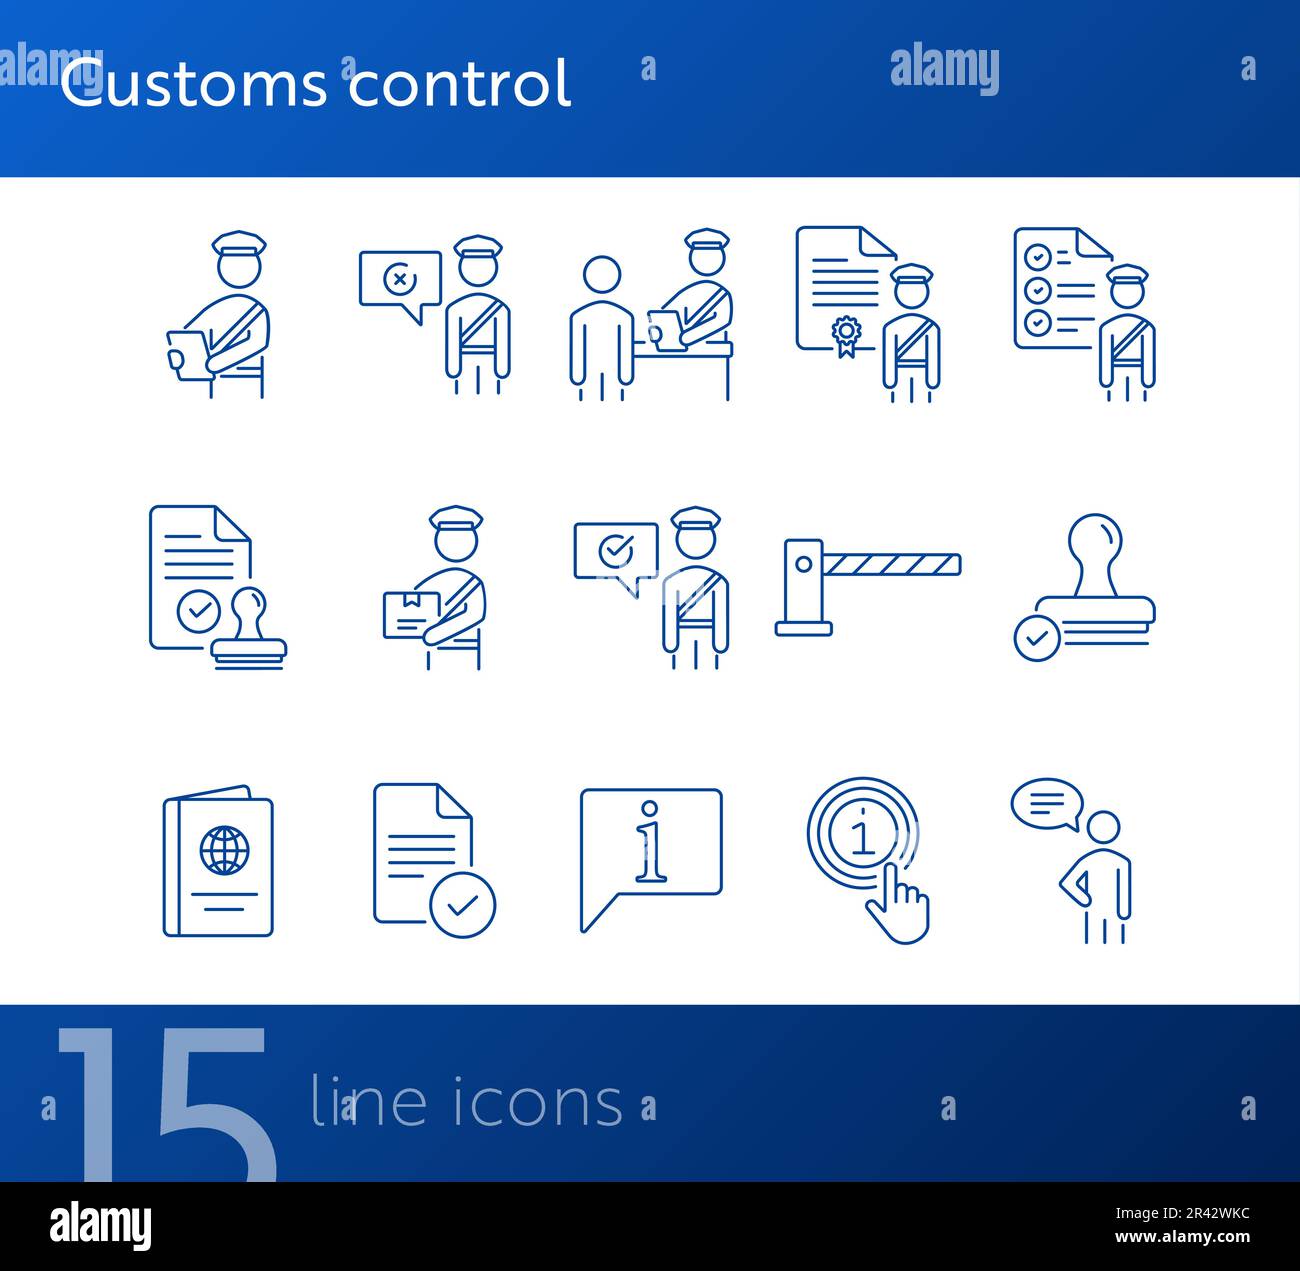 Customs control icons Stock Vector